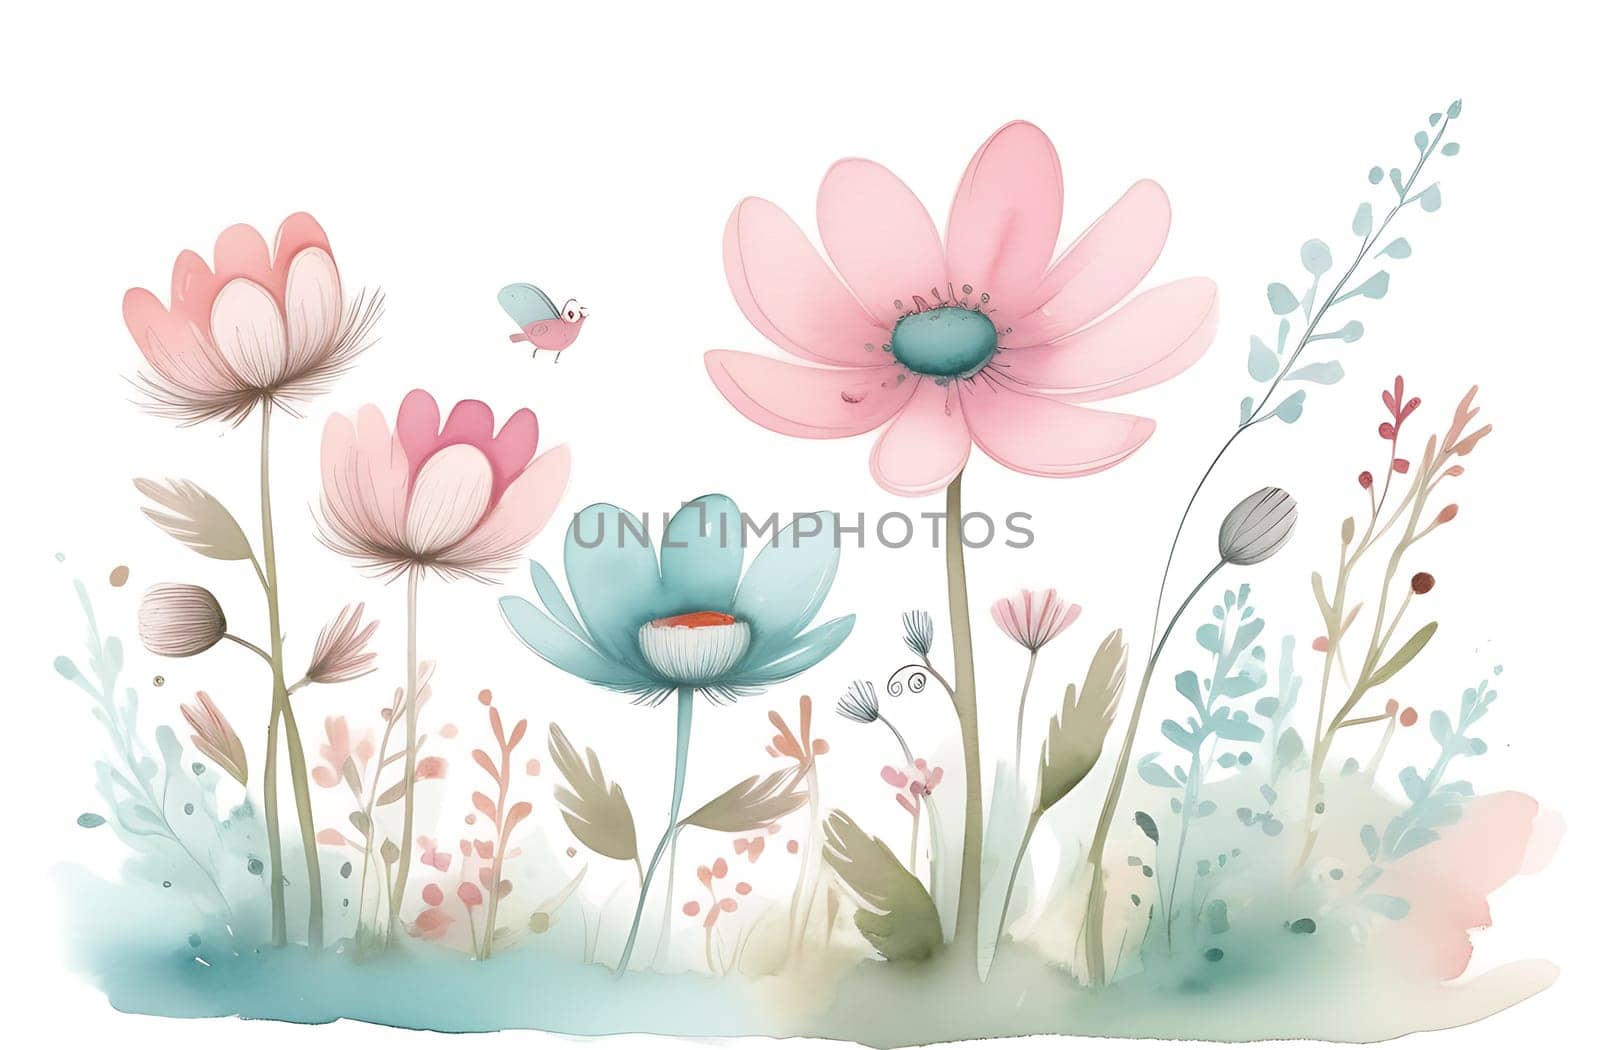 Watercolor flower set, delicate flowers, greeting card template, retro style by claire_lucia